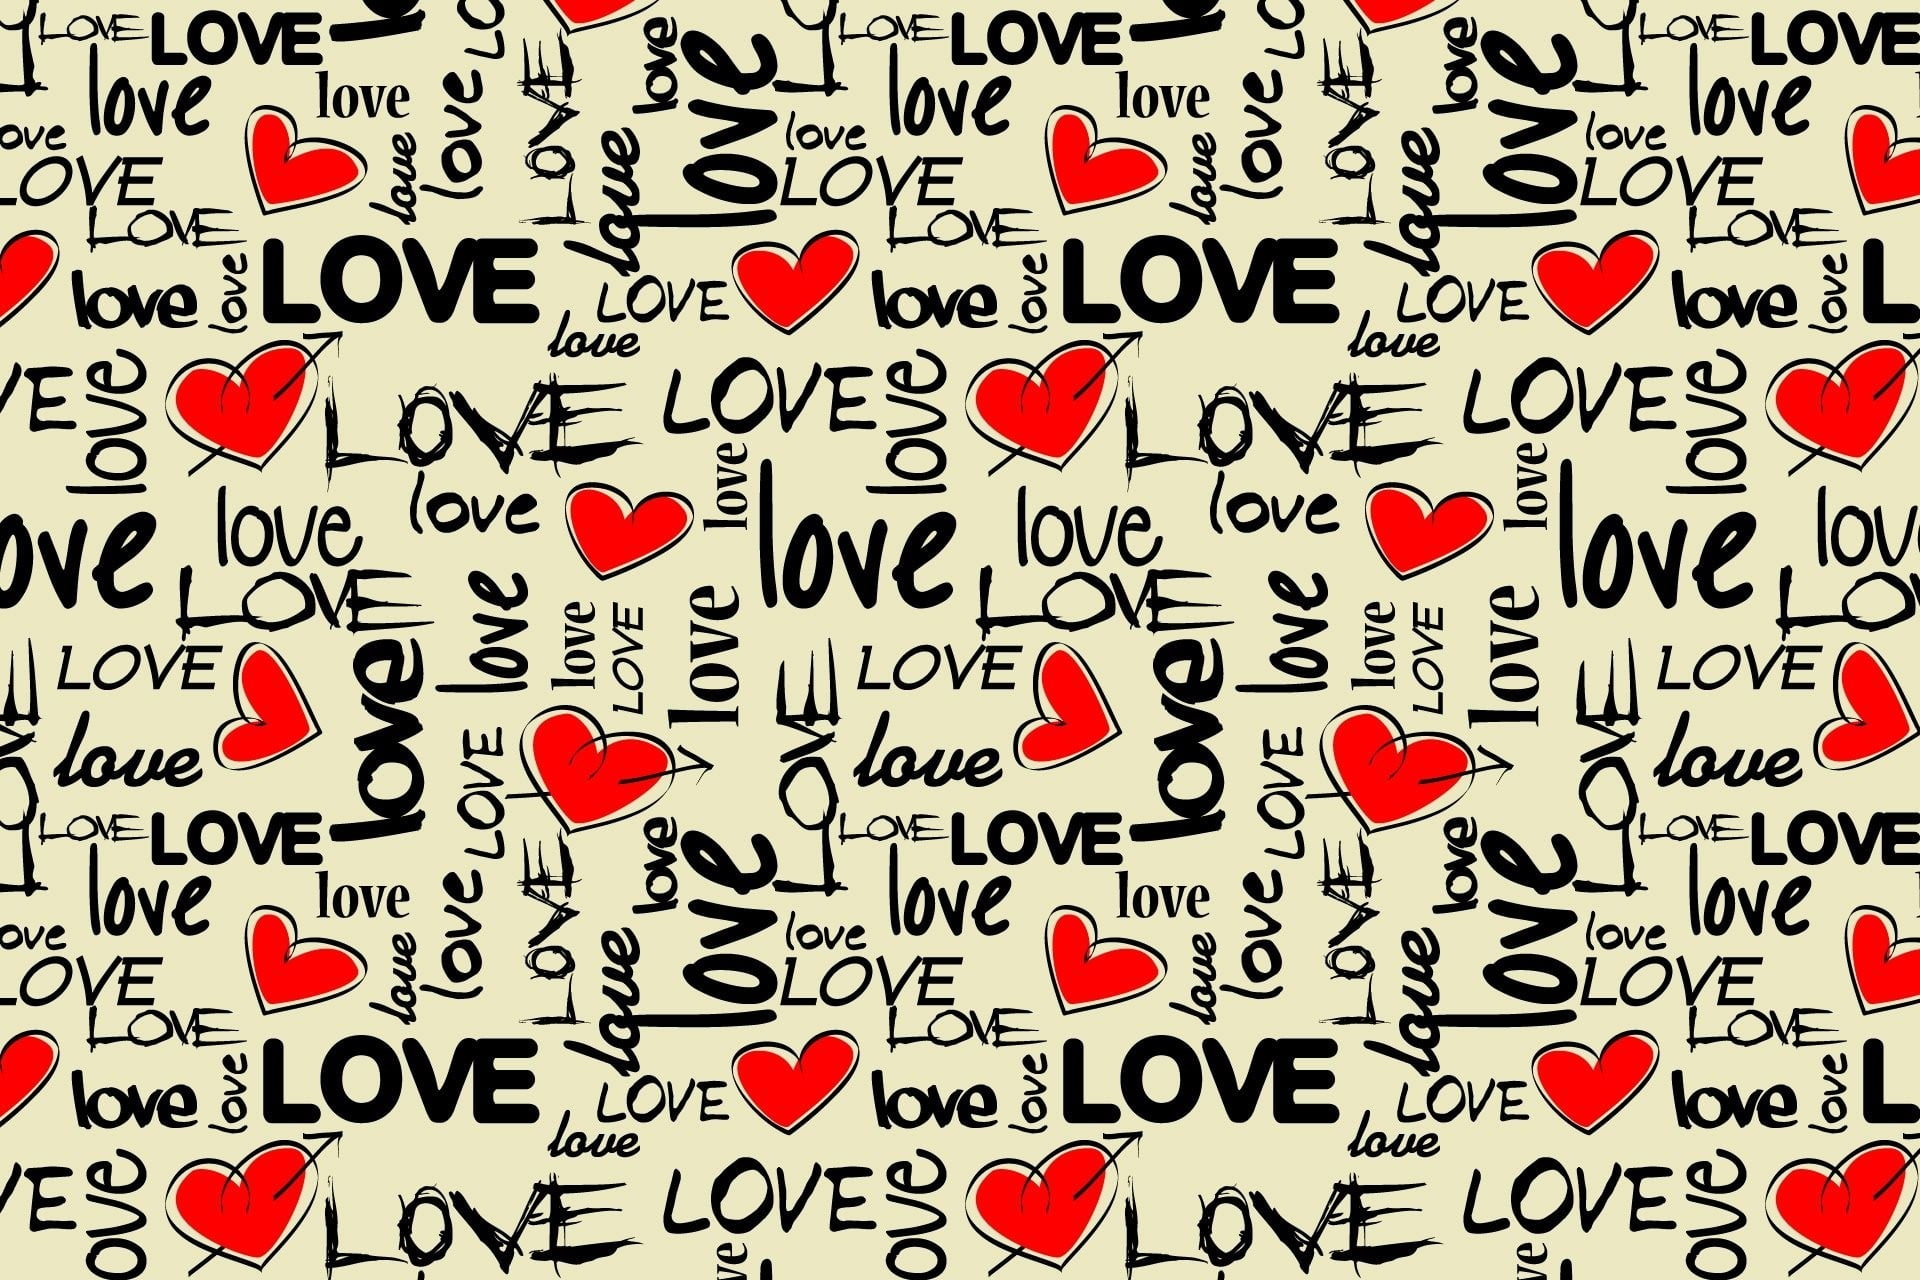 Love text with heart illustration